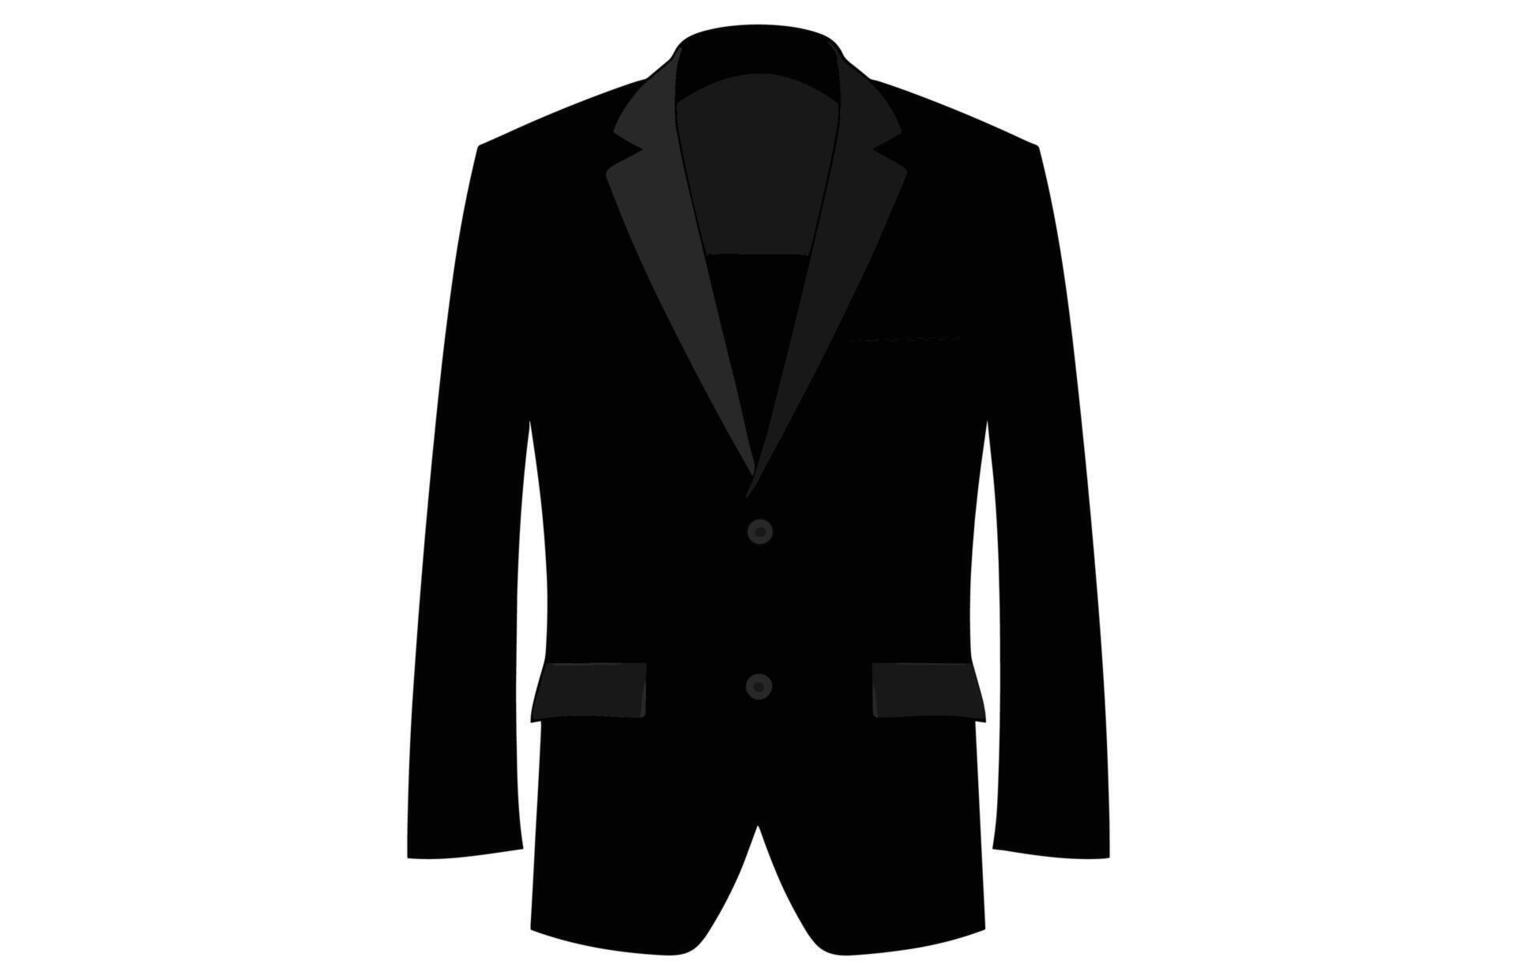 Suit Silhouette,Men blazer or jacket symbol simple silhouette icon on background vector